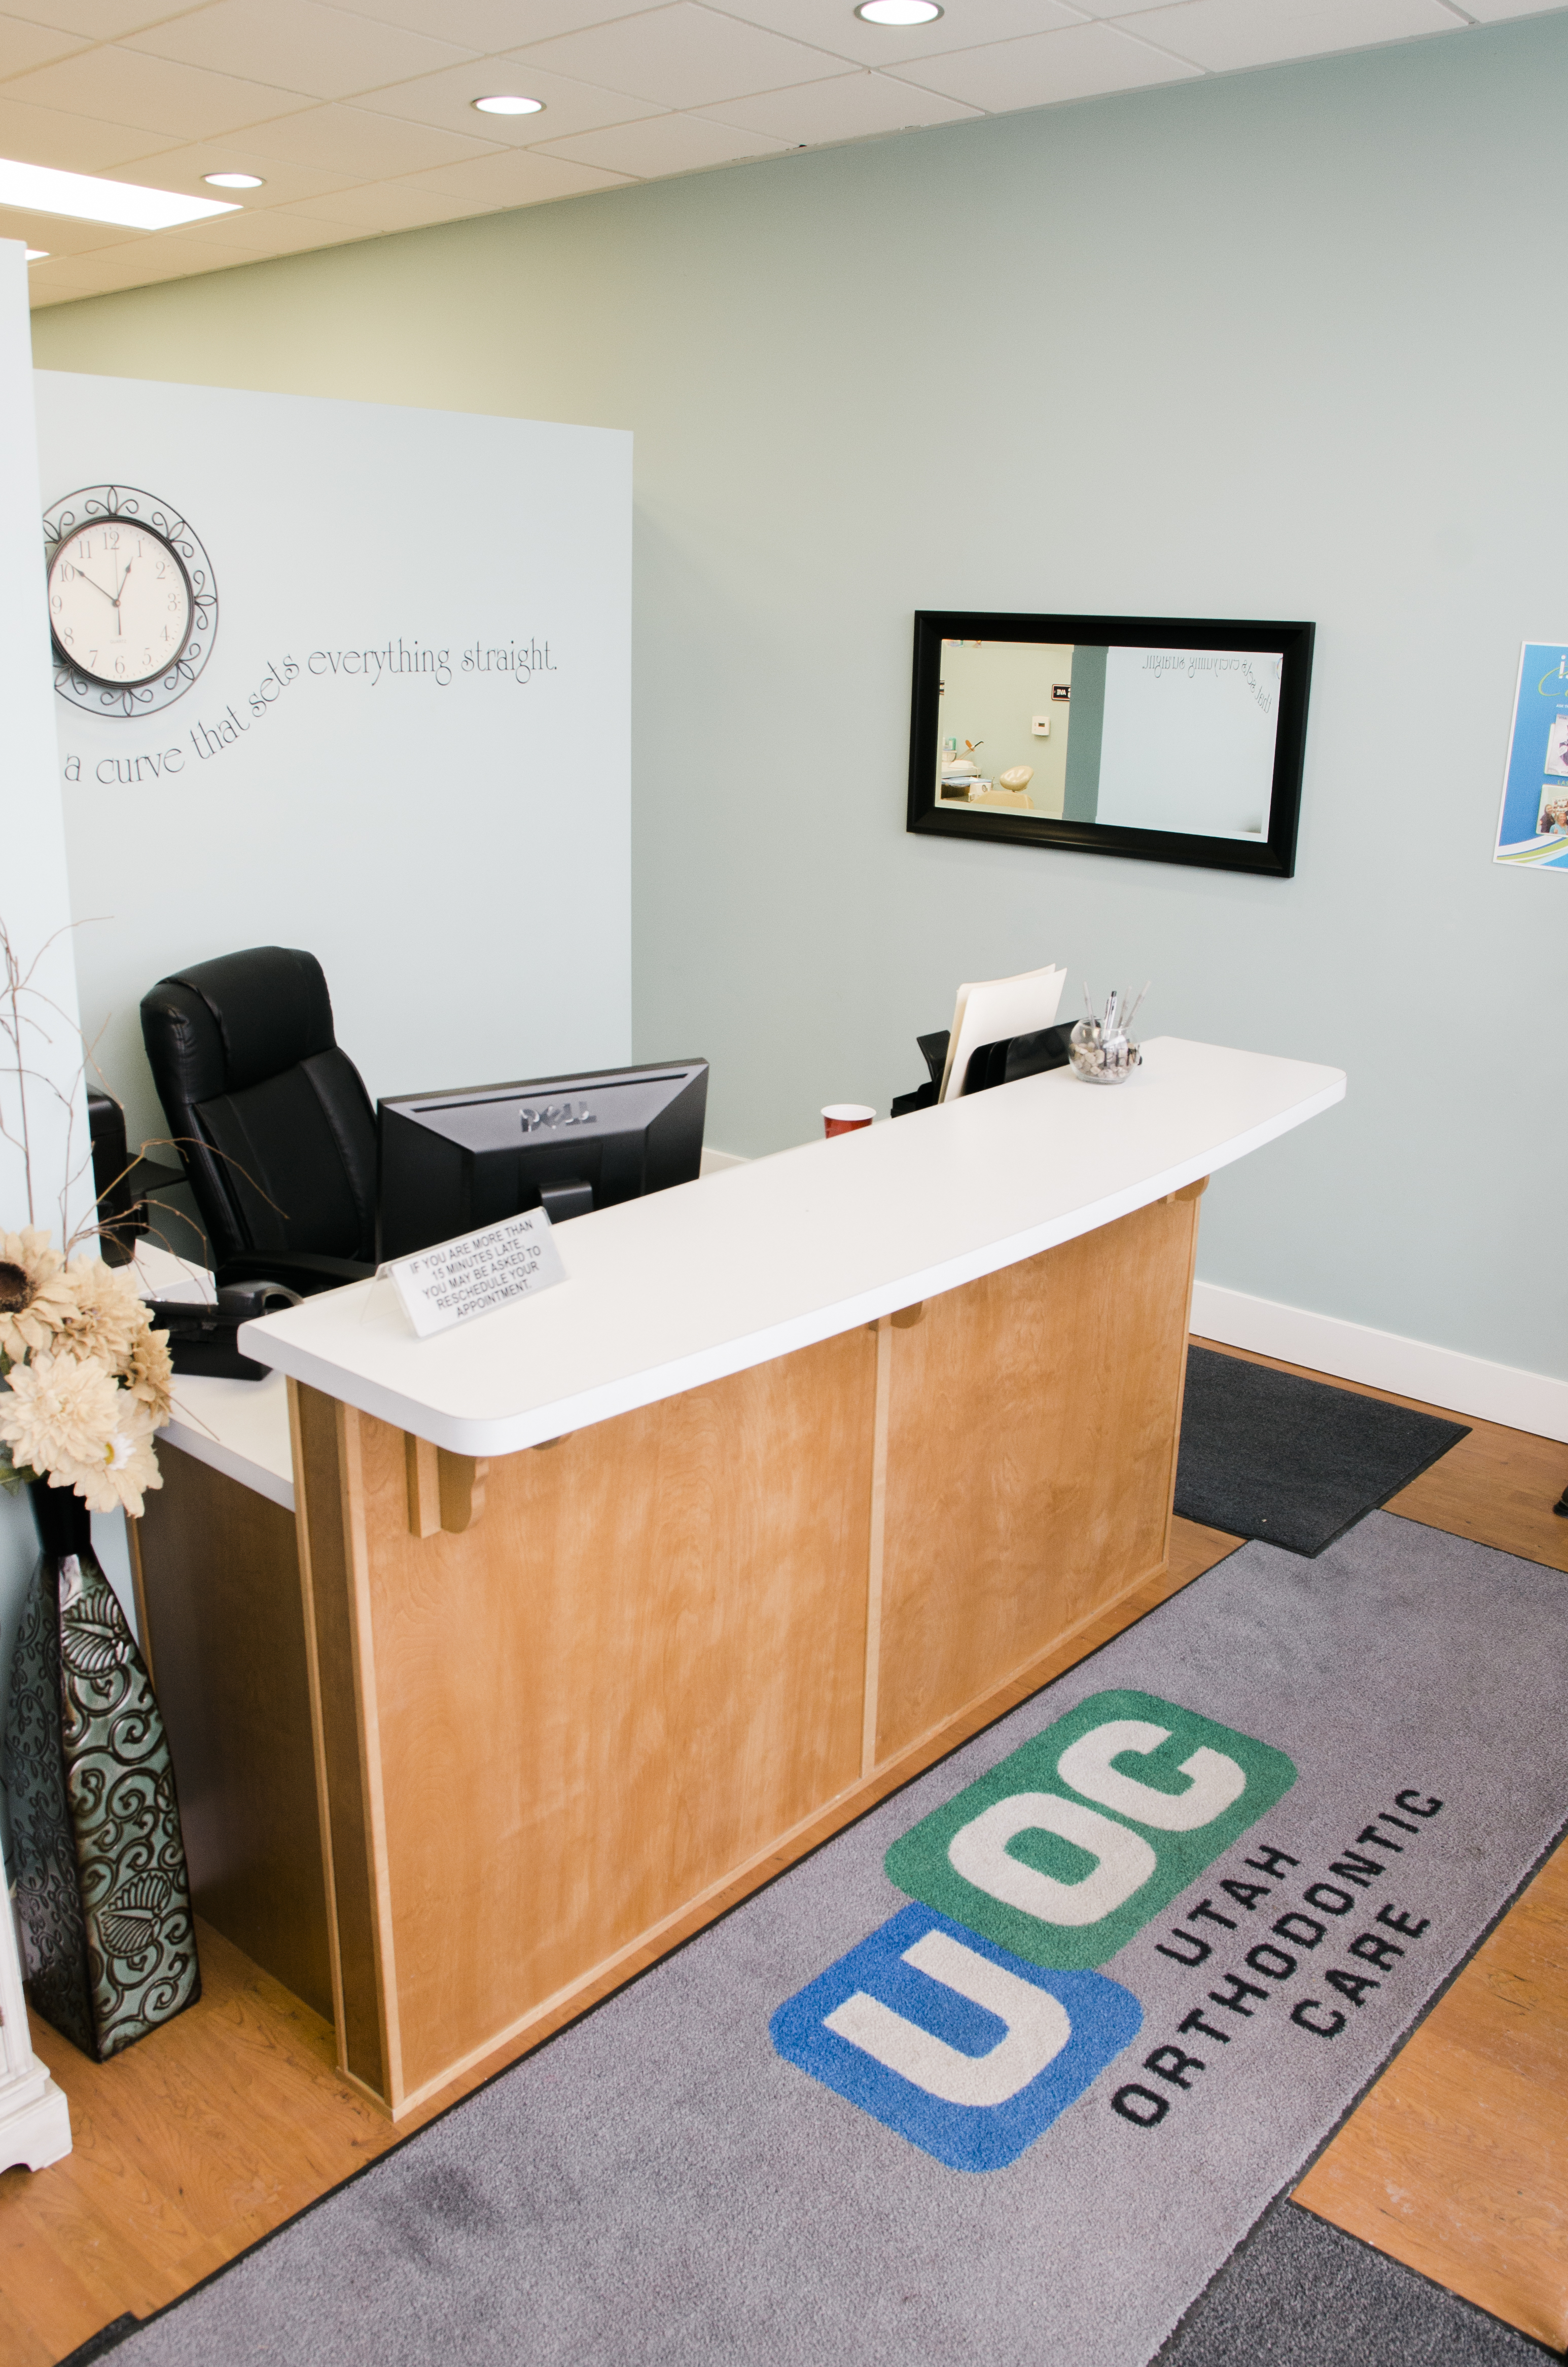 Schedule a Consultation with an Orthodontist Near You